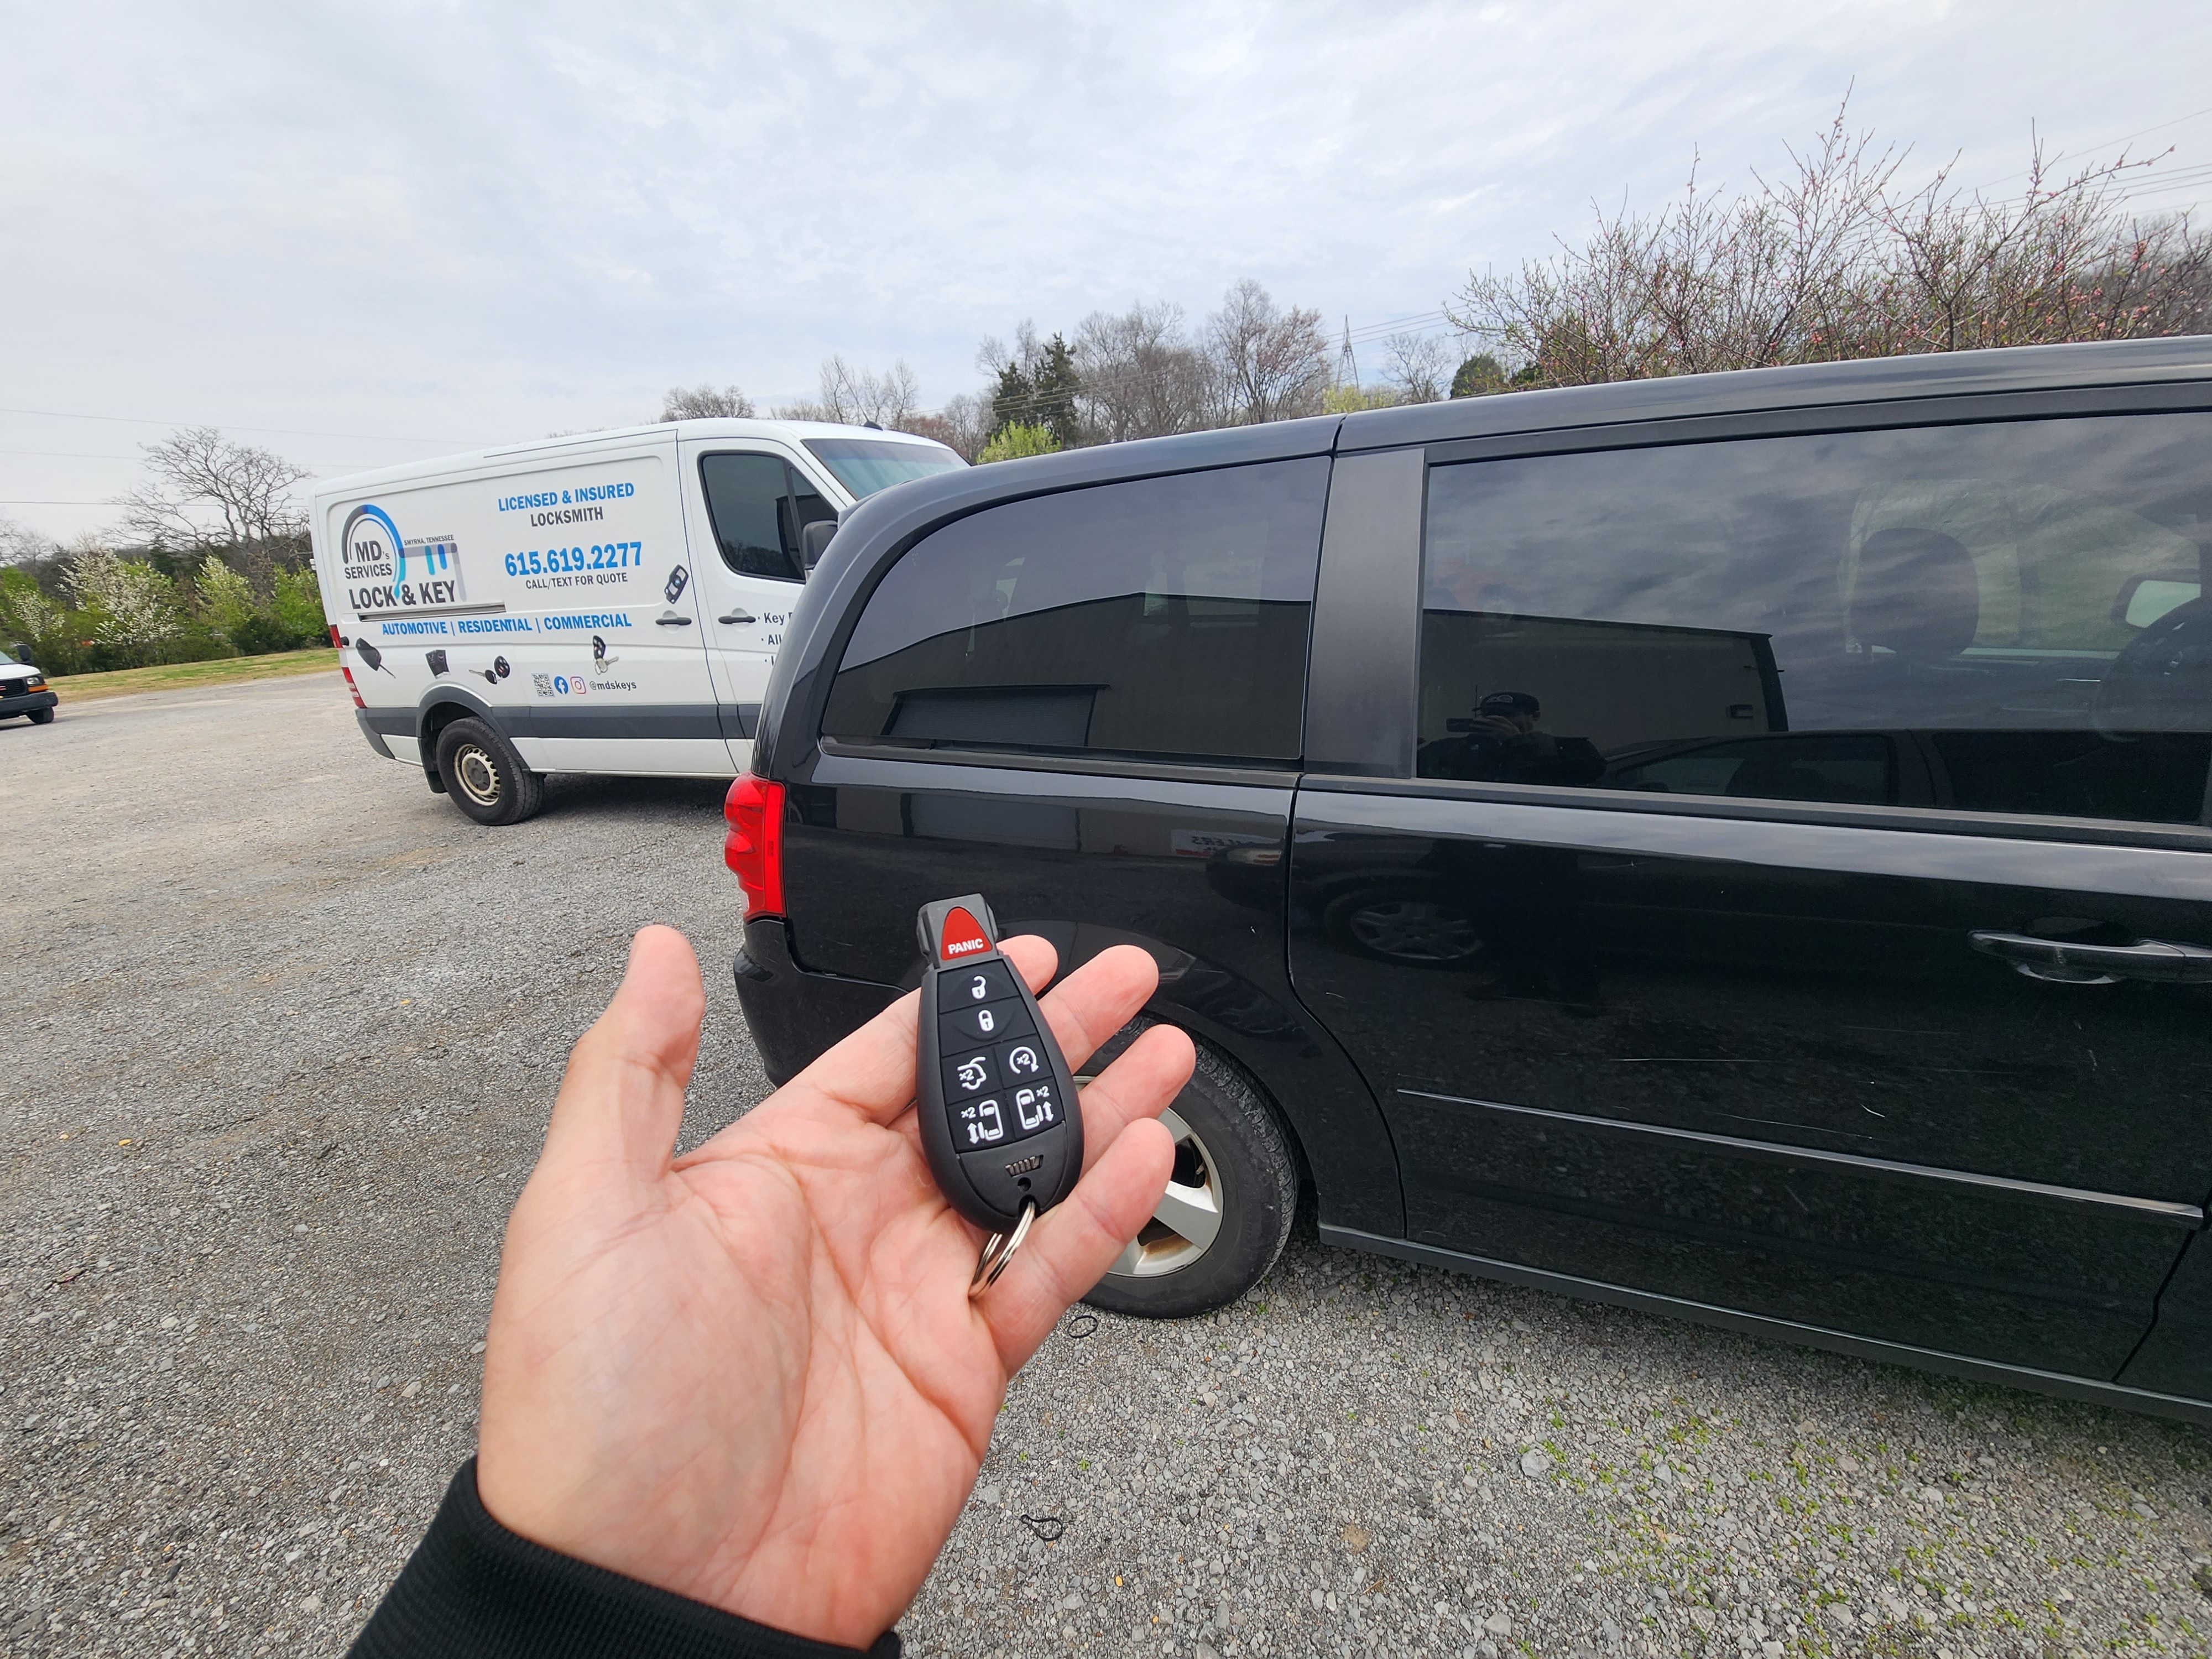 Lost All Your Keys During a Move-Out in Smyrna, TN? Contact MDS Services Lock and Key for a Swift Solution!